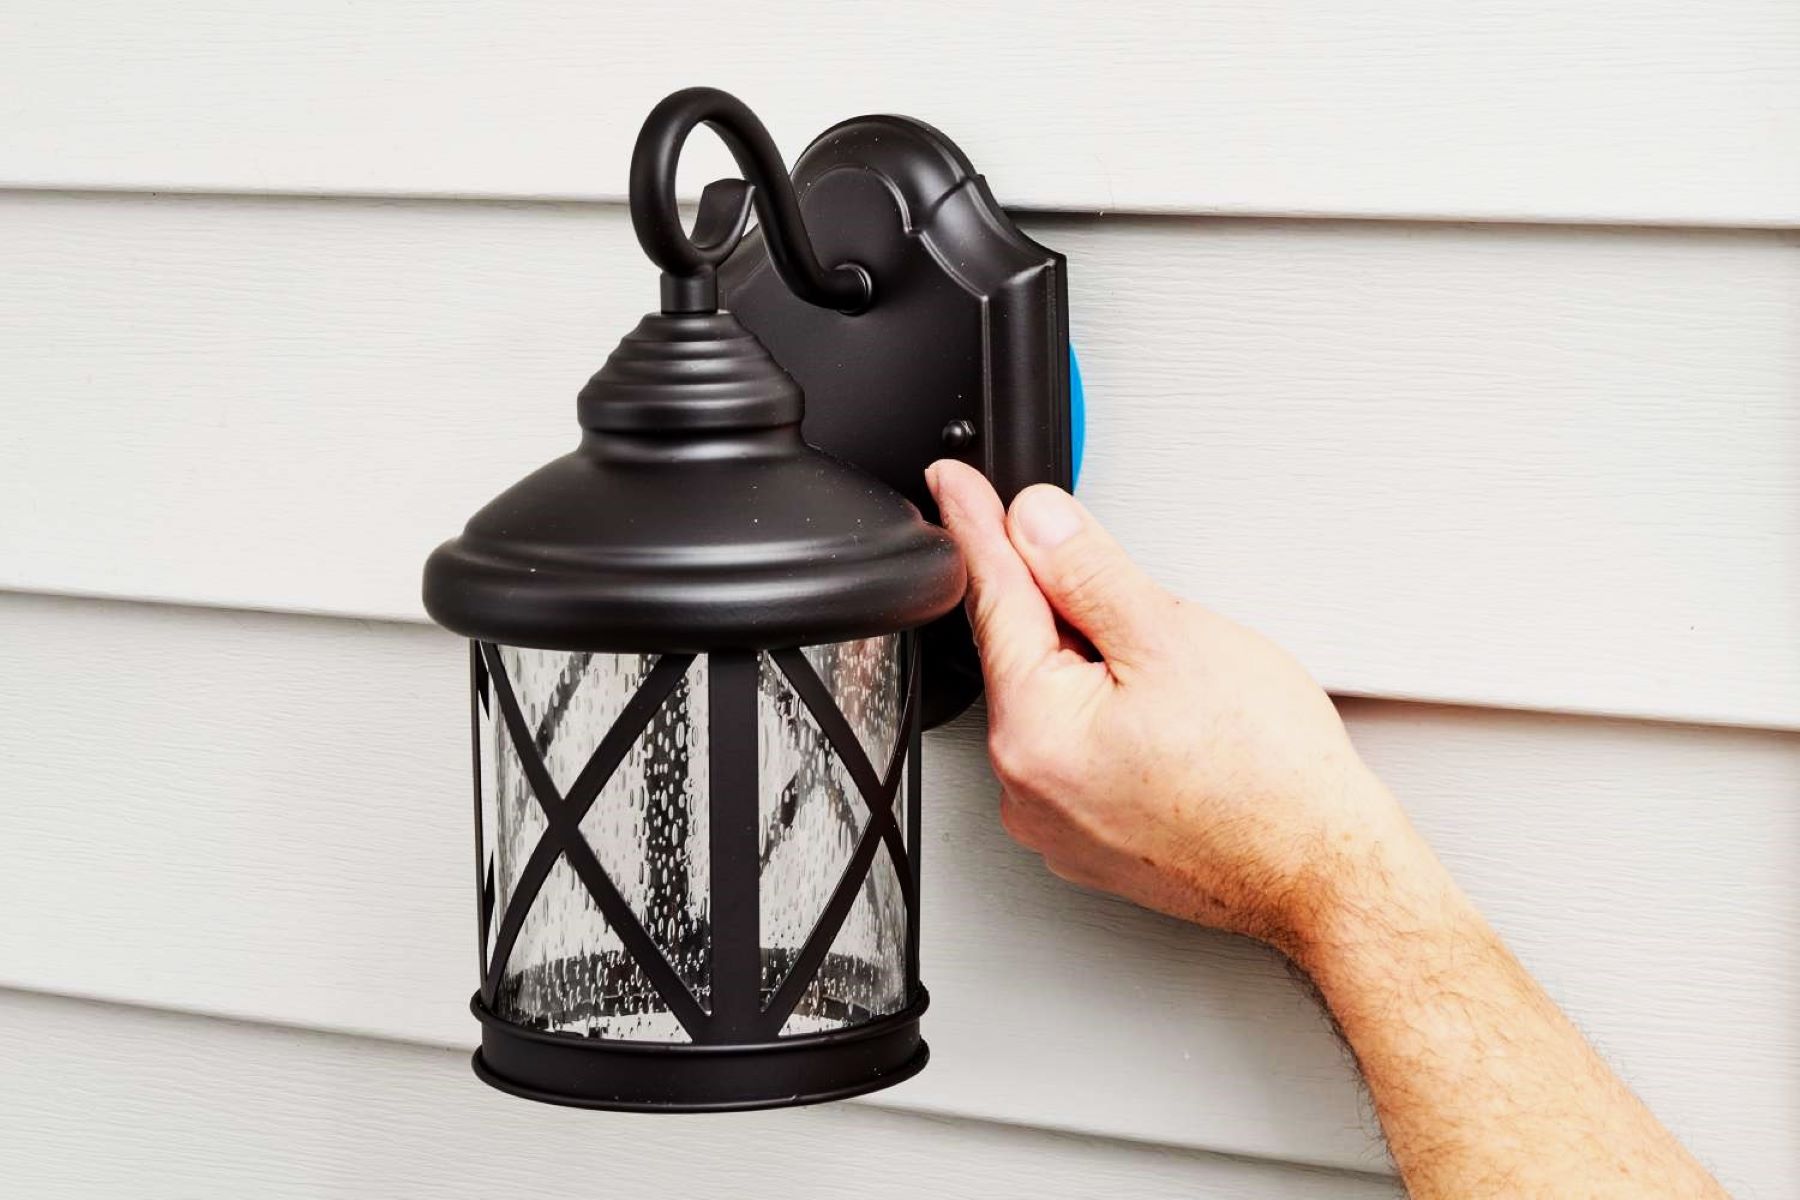 How To Remove Glass From Outdoor Light Fixture